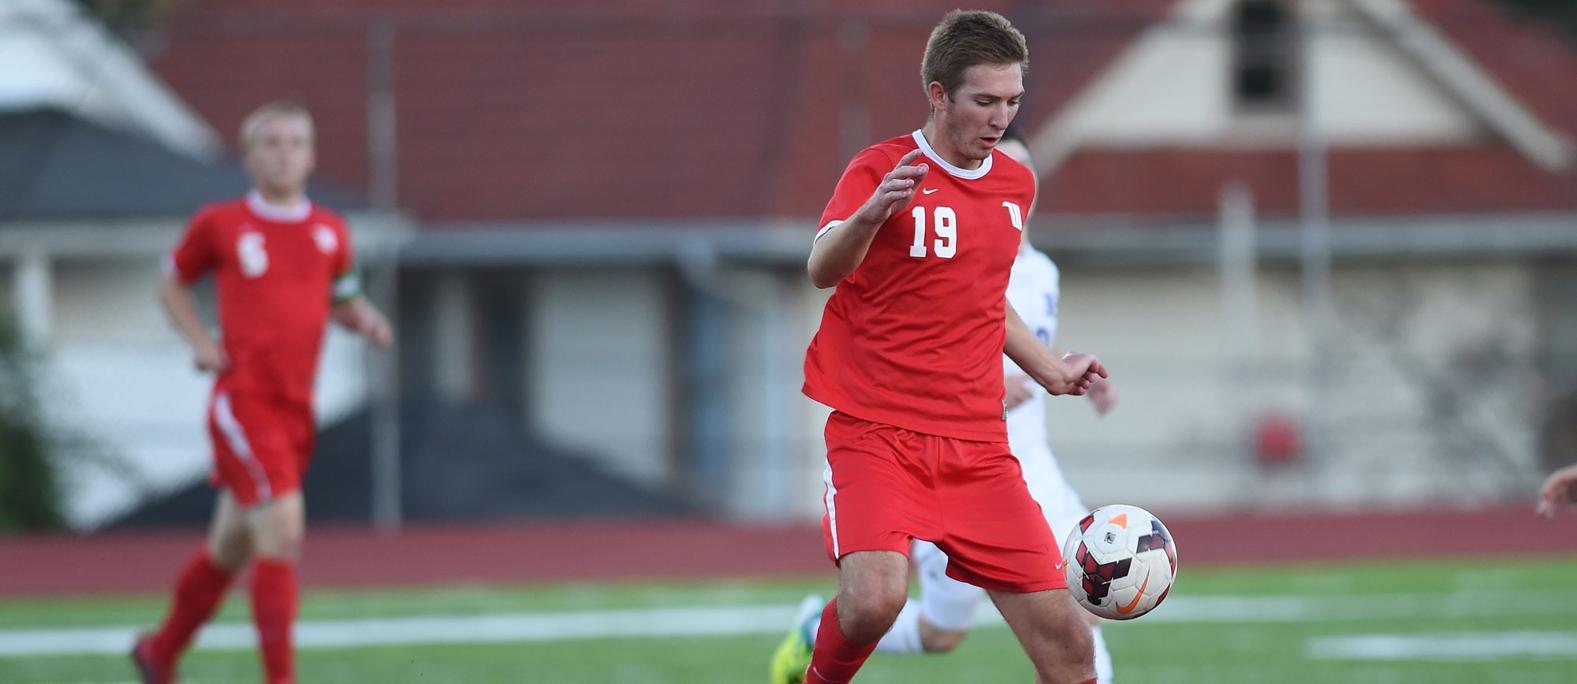 Christian Null and the Tigers came up on the short end of a 6-0 score at Ohio Wesleyan. File Photo | Nick Falzerano